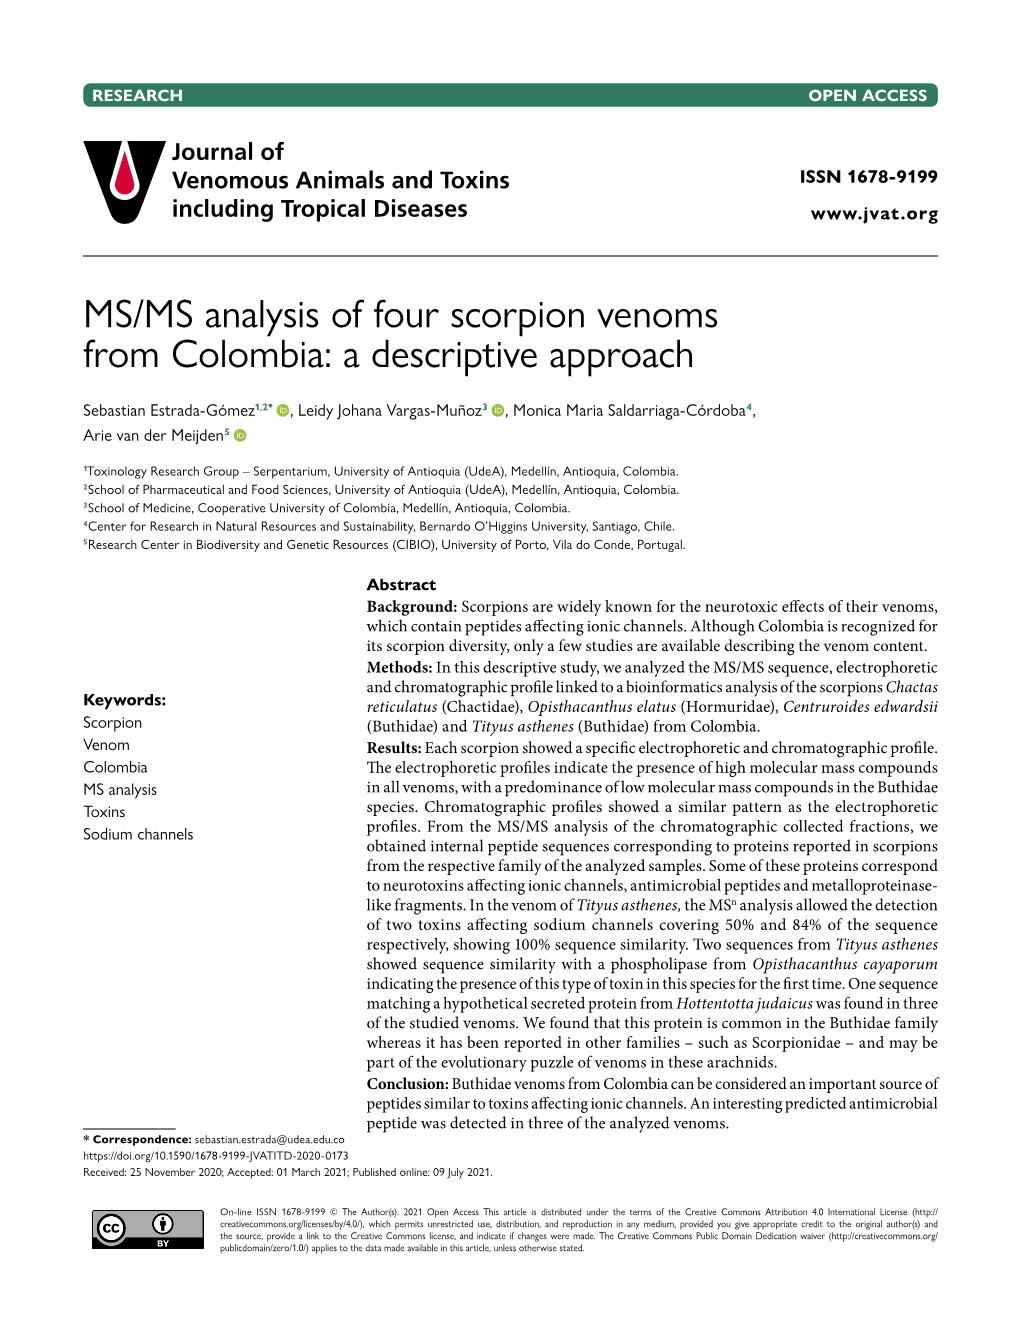 MS/MS Analysis of Four Scorpion Venoms from Colombia: a Descriptive Approach